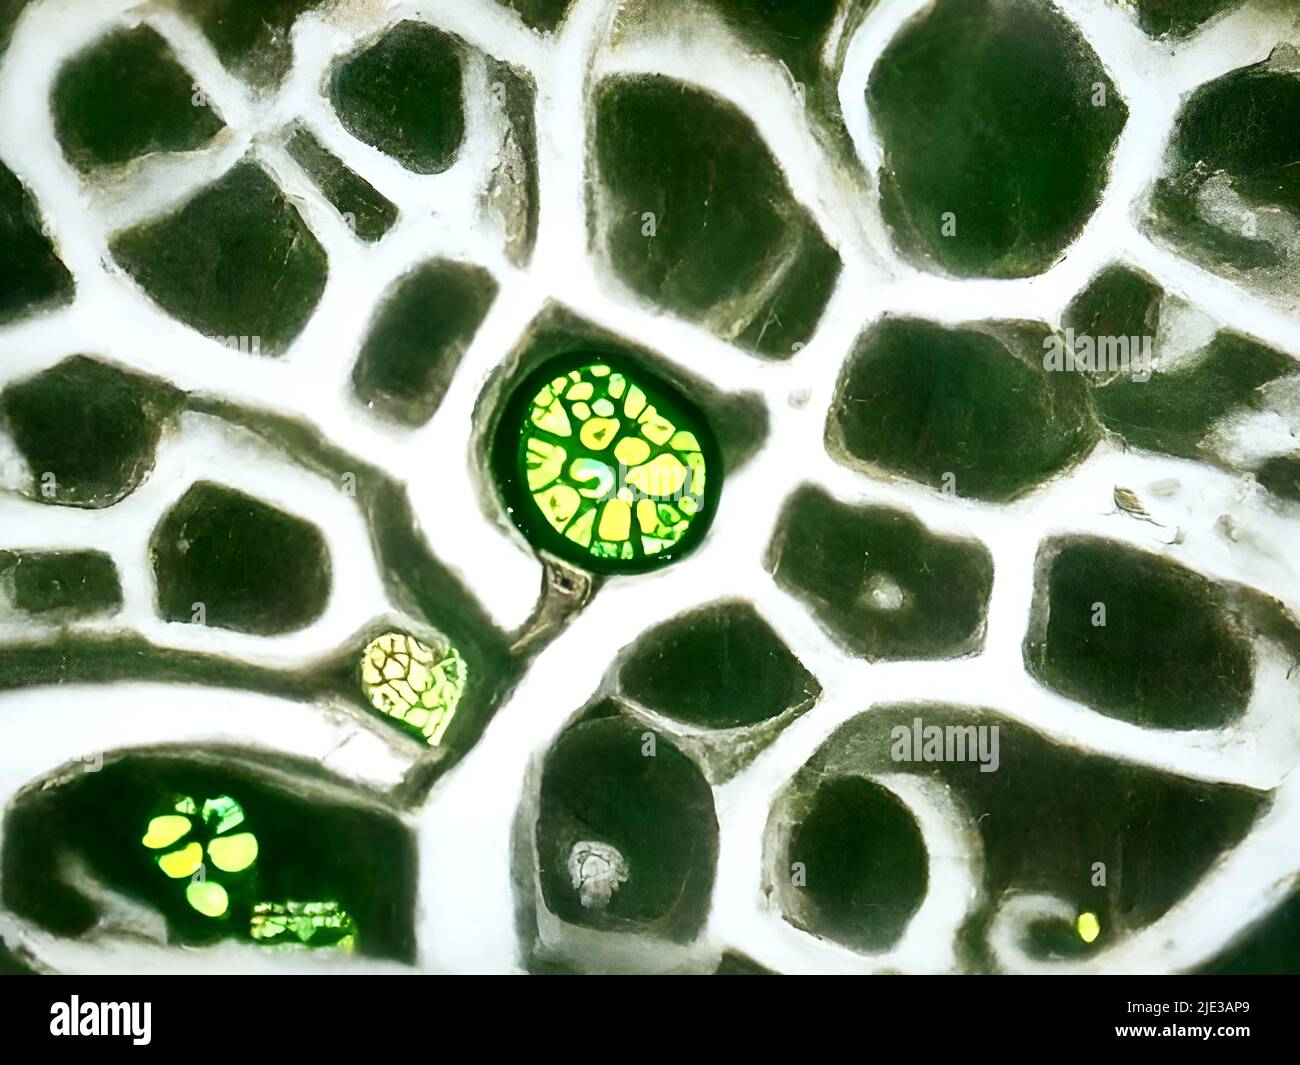 Plant cells under the microscope Stock Photo